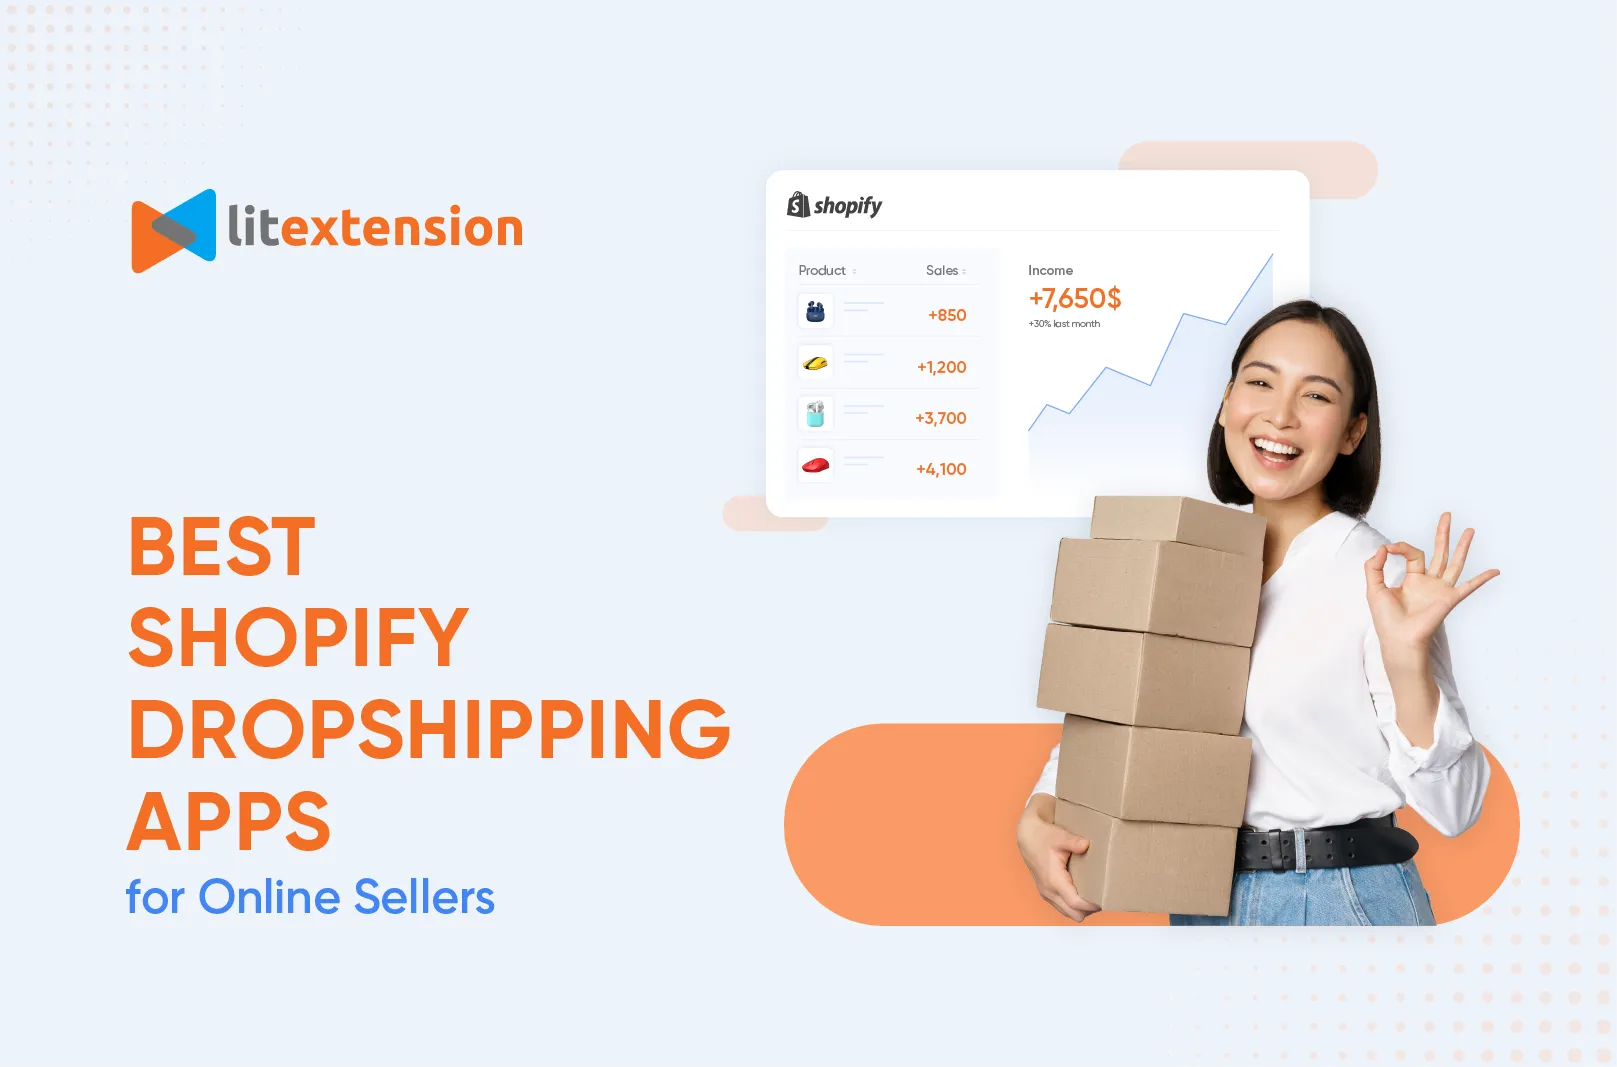 5 Simple Steps to Start  Dropshipping in 2023 - Dropshipping From China